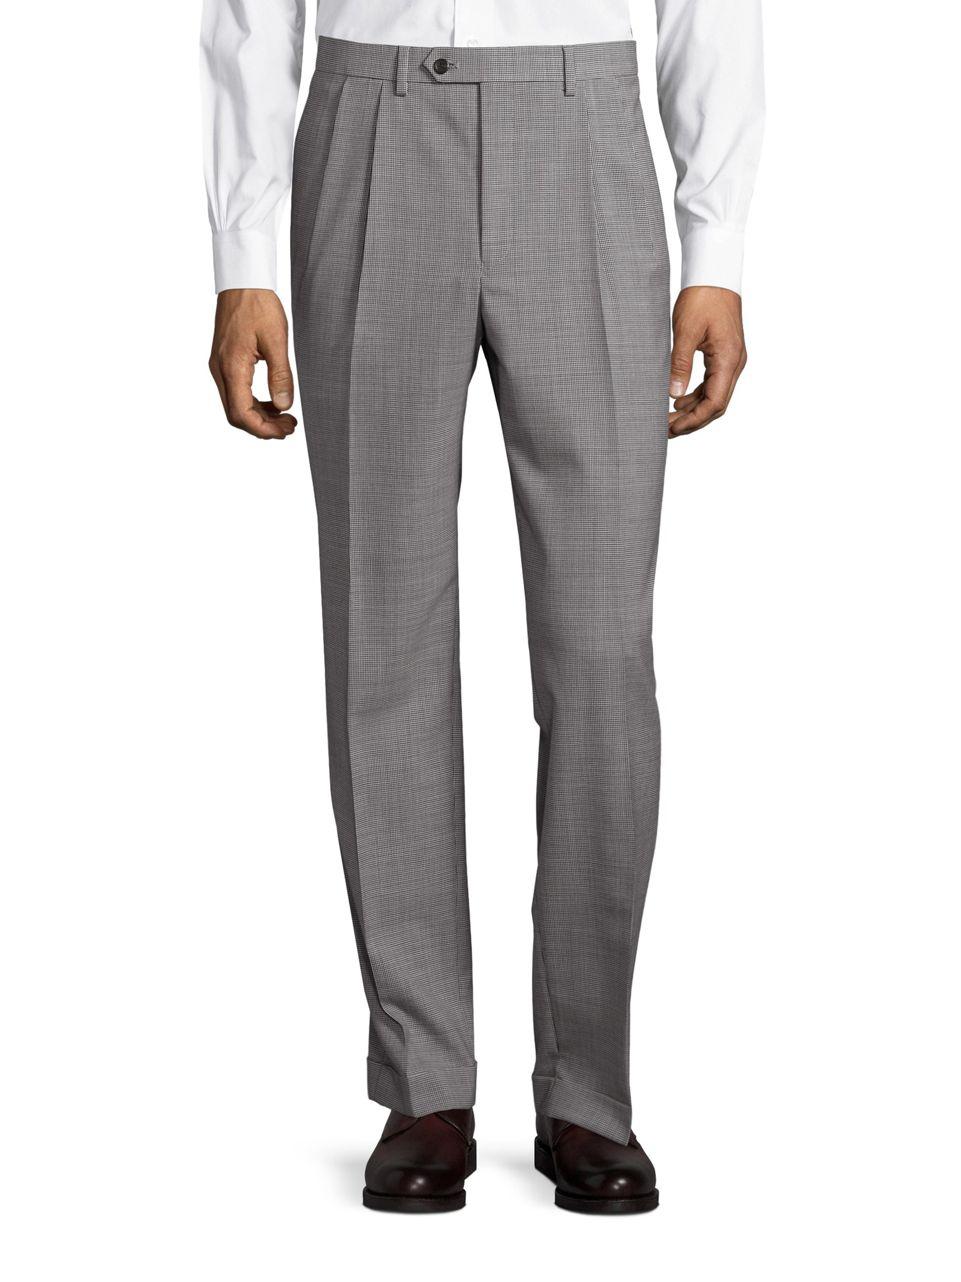 Popular Mens Houndstooth Suit-Buy Cheap Mens Houndstooth